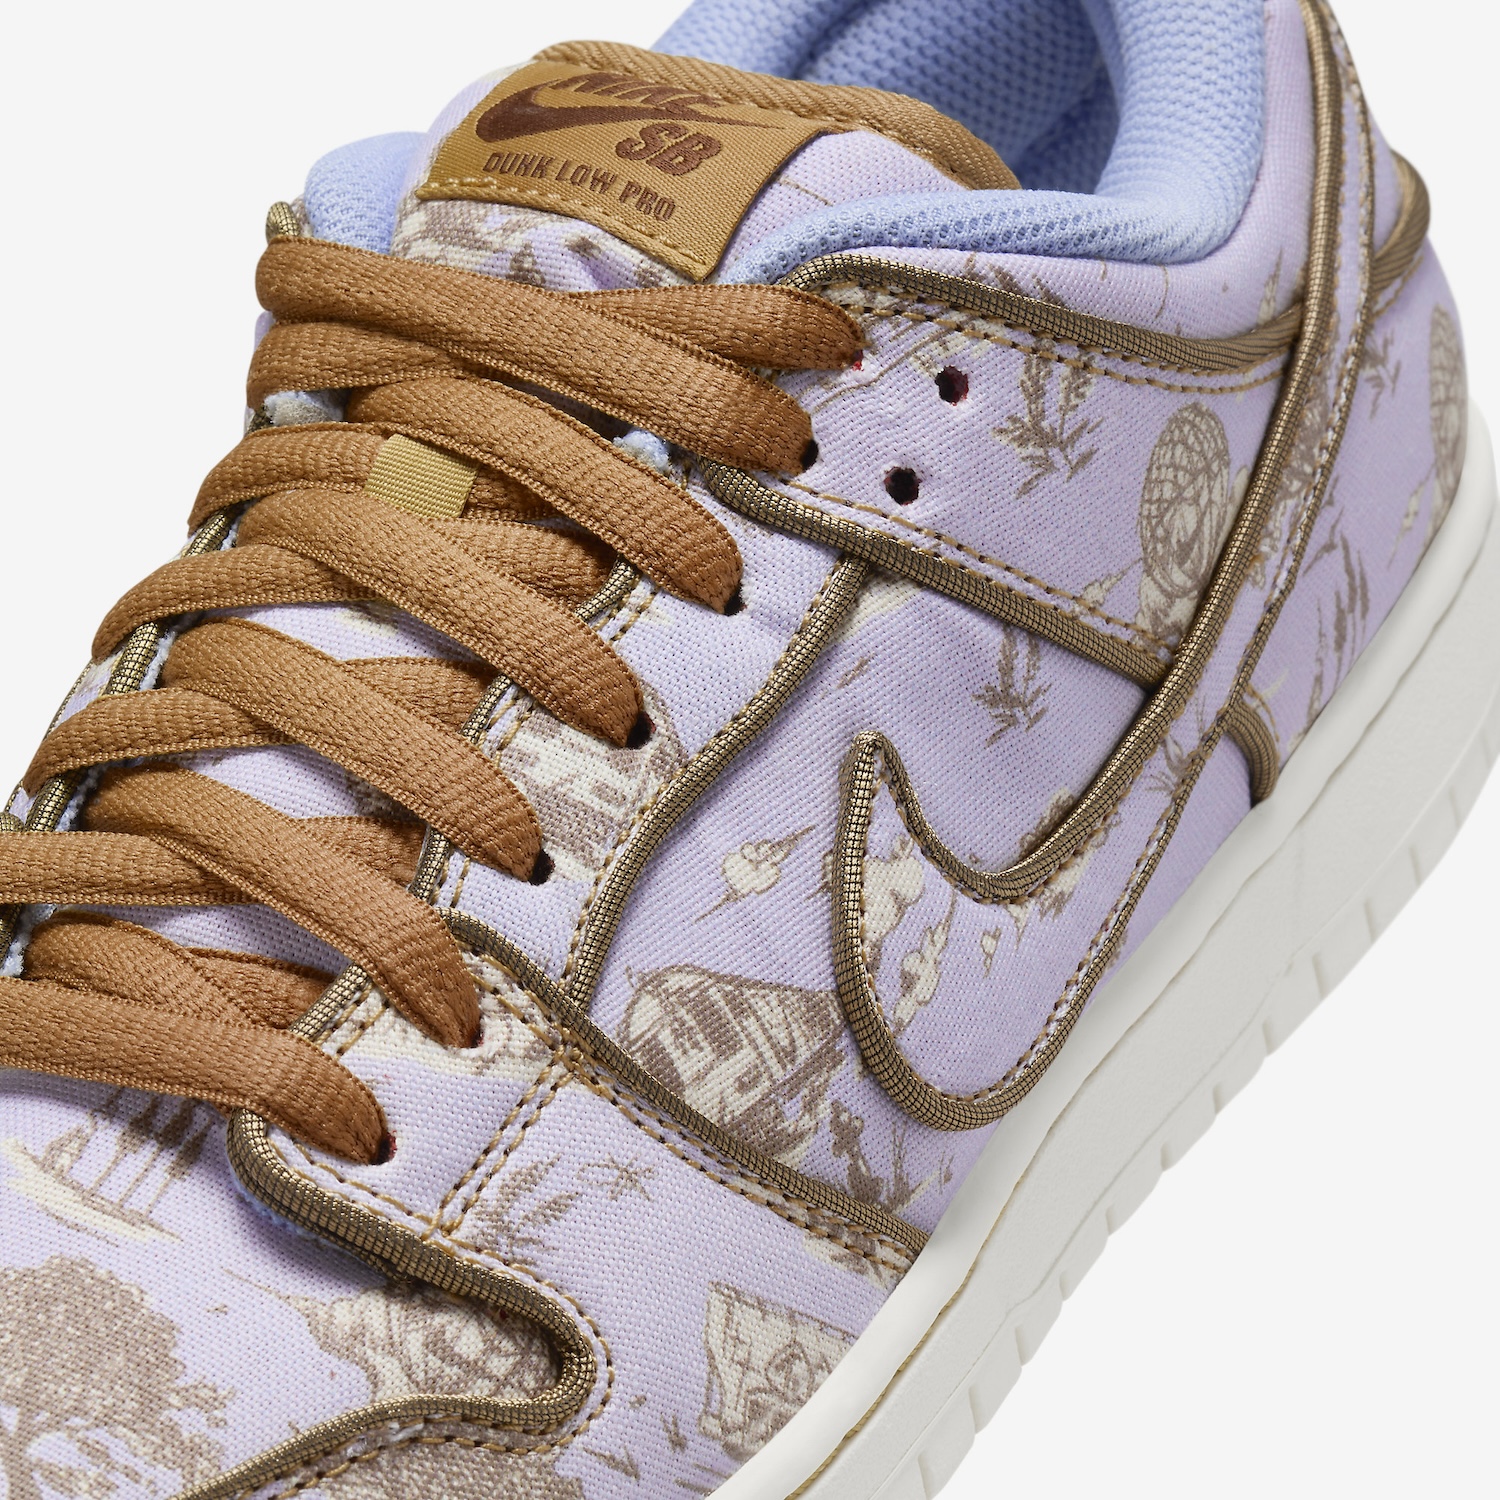  Nike SB Dunk Low City of Style FN5880-001 Release Date